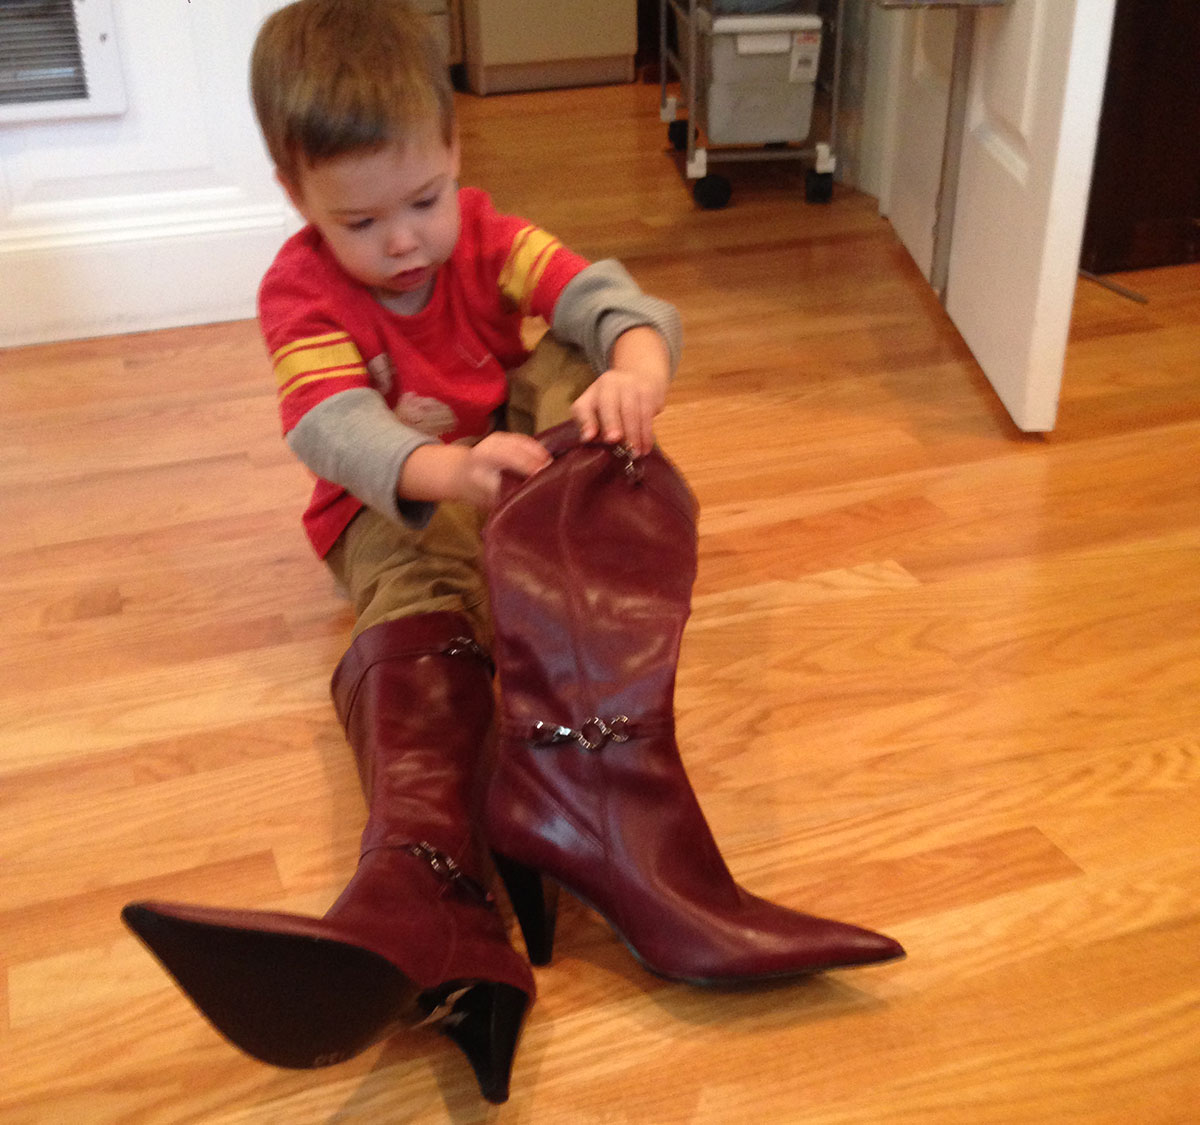 Loa's nephew tries on her boots